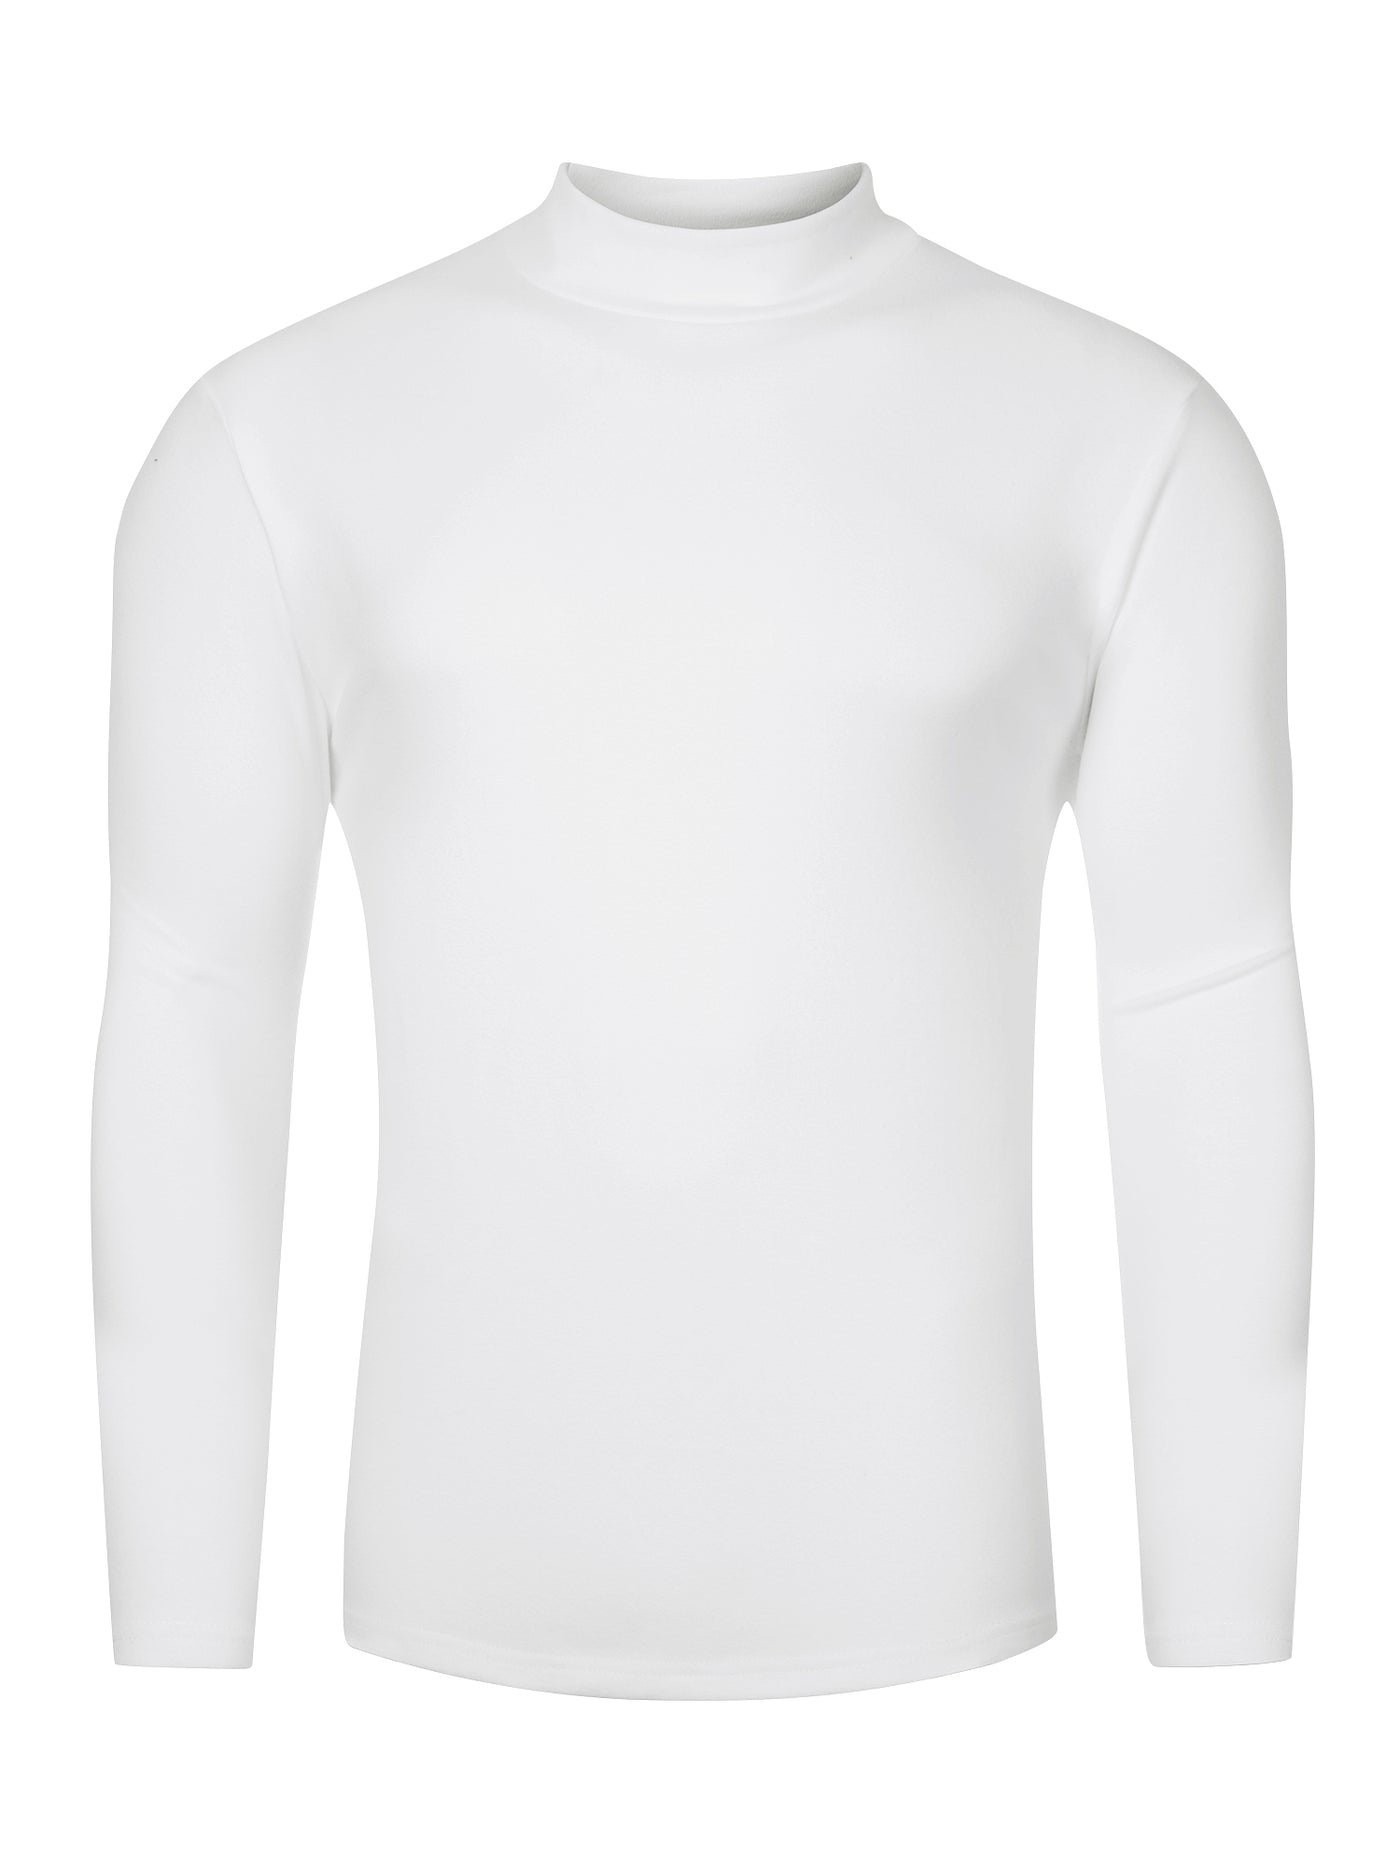 Bublédon Mock Neck T-Shirts for Men's Slim Fit Long Sleeves Solid Basic Shirts Top Pullover